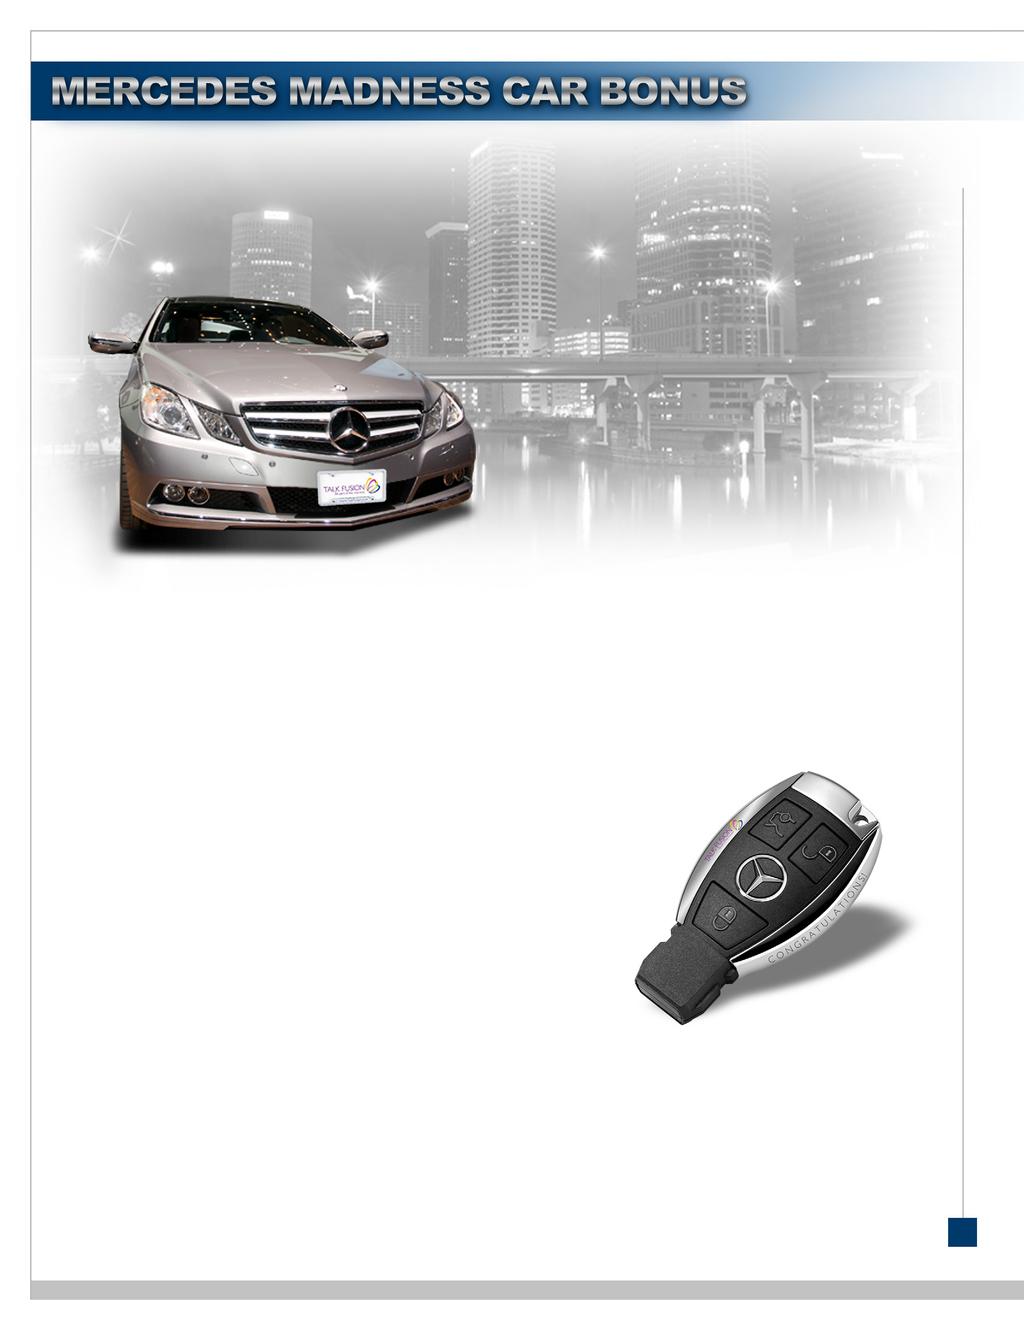 Talk Fusion rewards your efforts and celebrates your success by paying for you to drive a brand-new Mercedes-Benz.